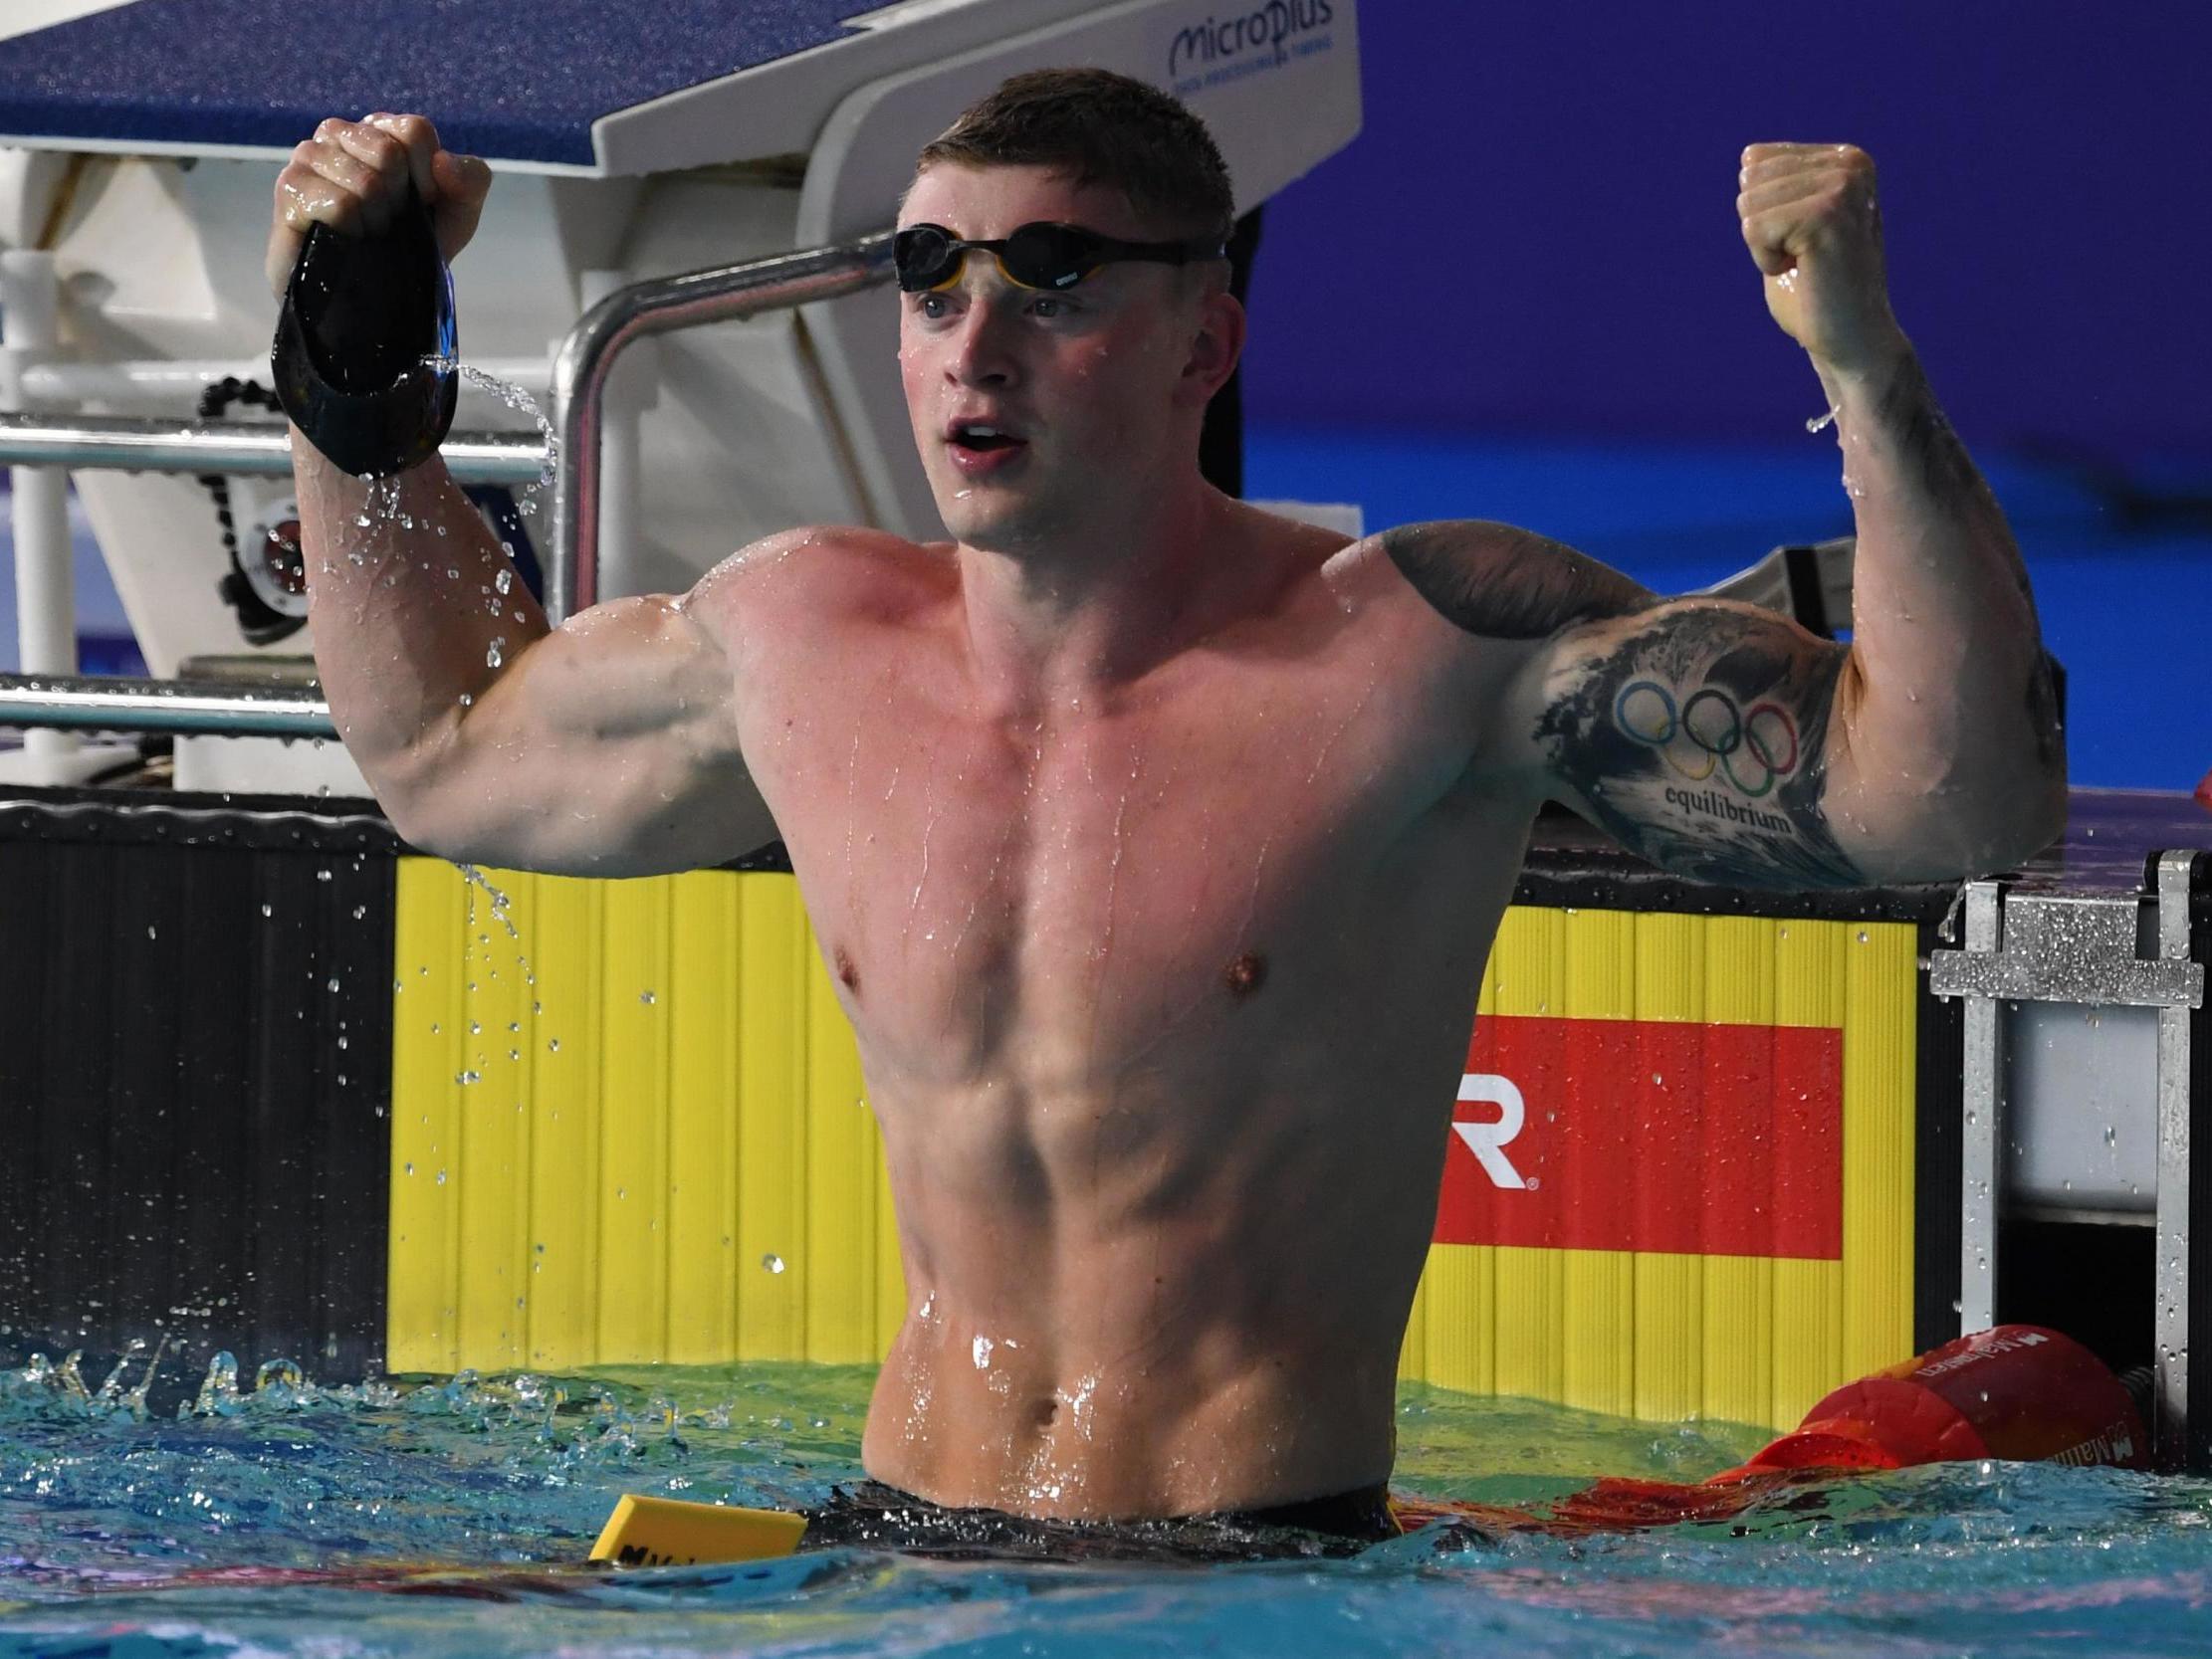 The Briton celebrates yet another gold medal victory